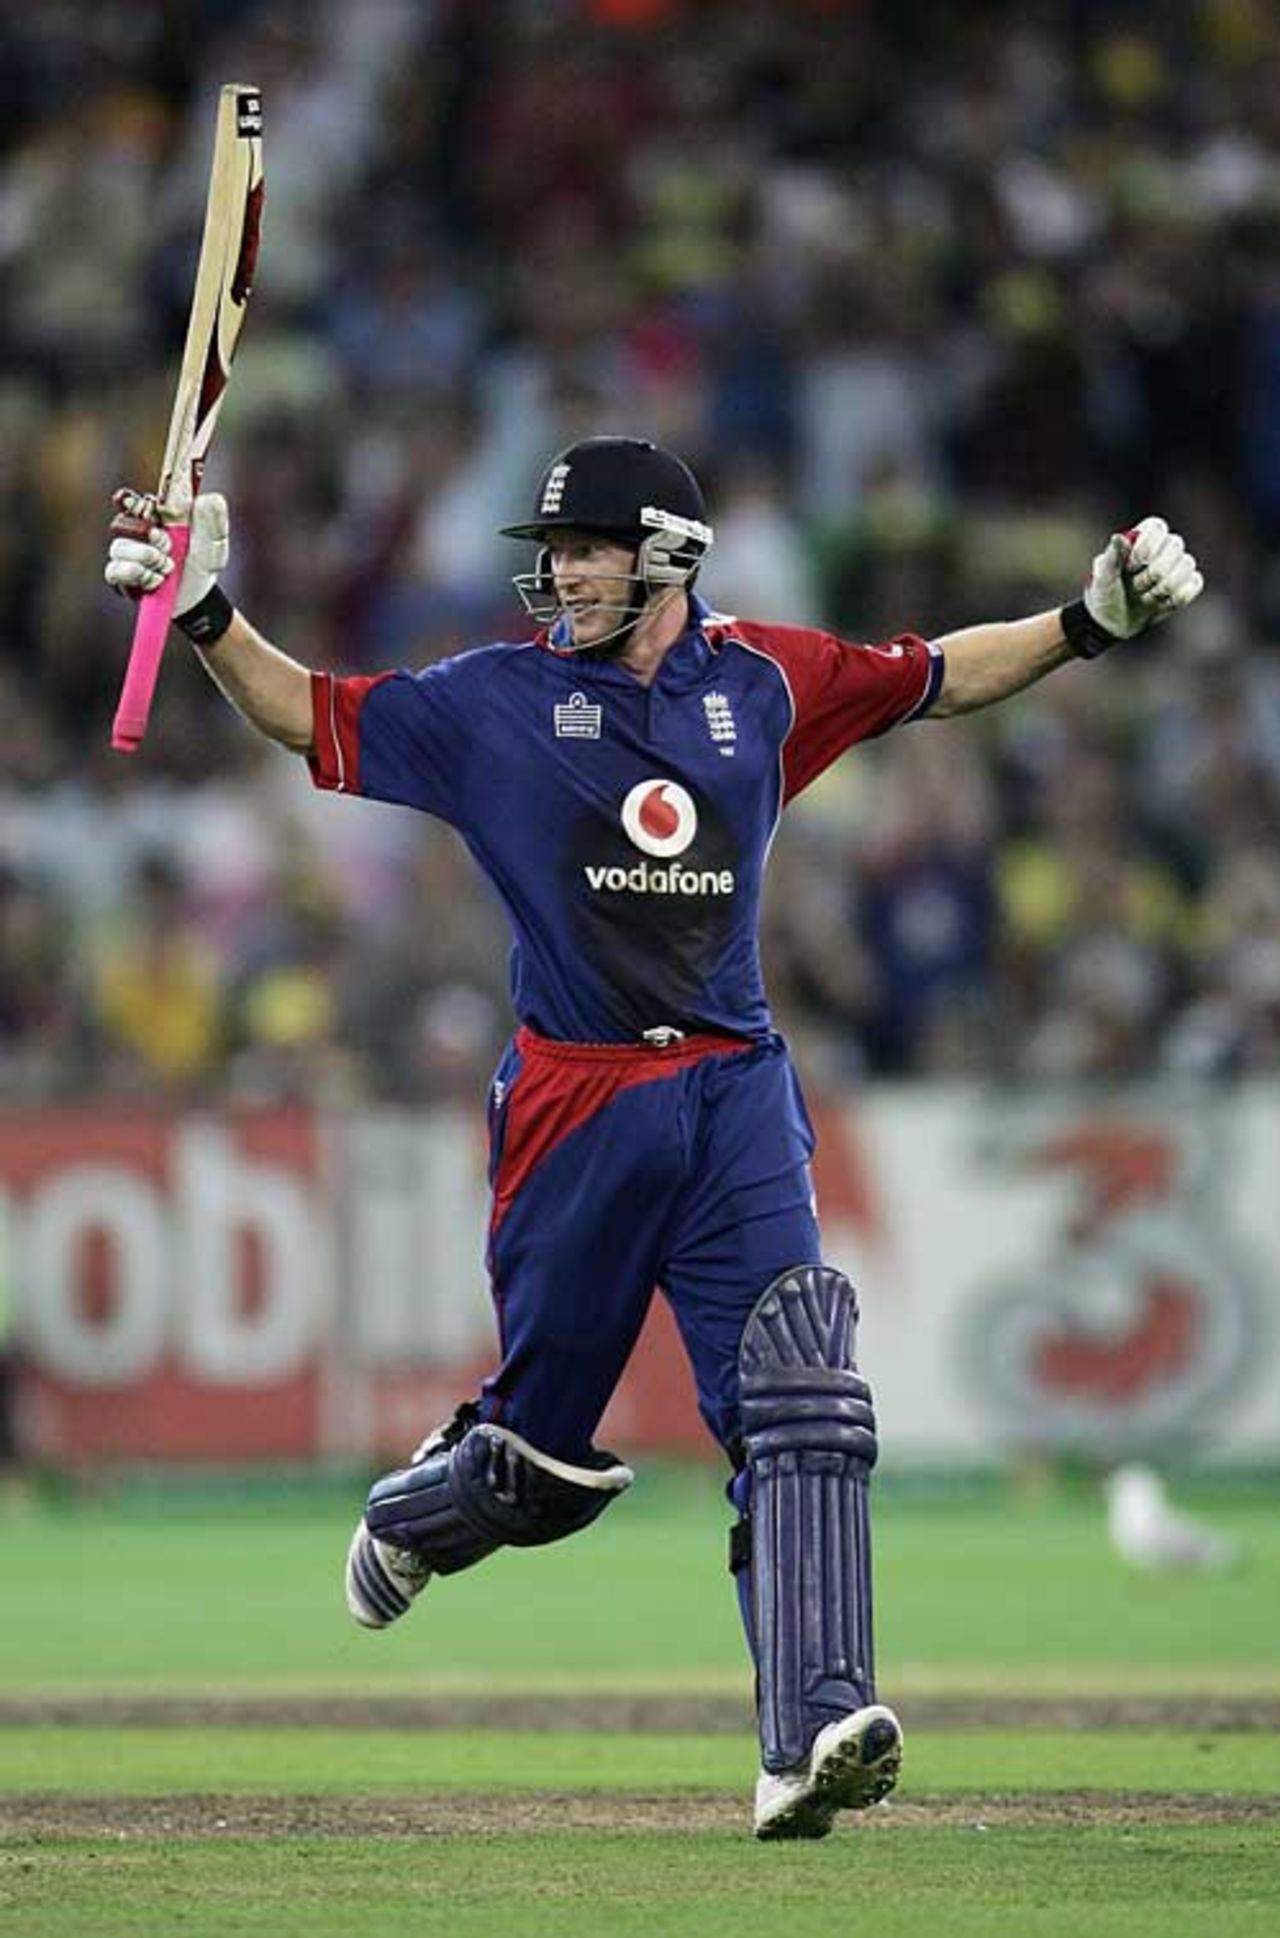 Paul Collingwood raises his arms after hitting the winning runs, Australia v England, first CB Series final, Melbourne, February 9, 2007